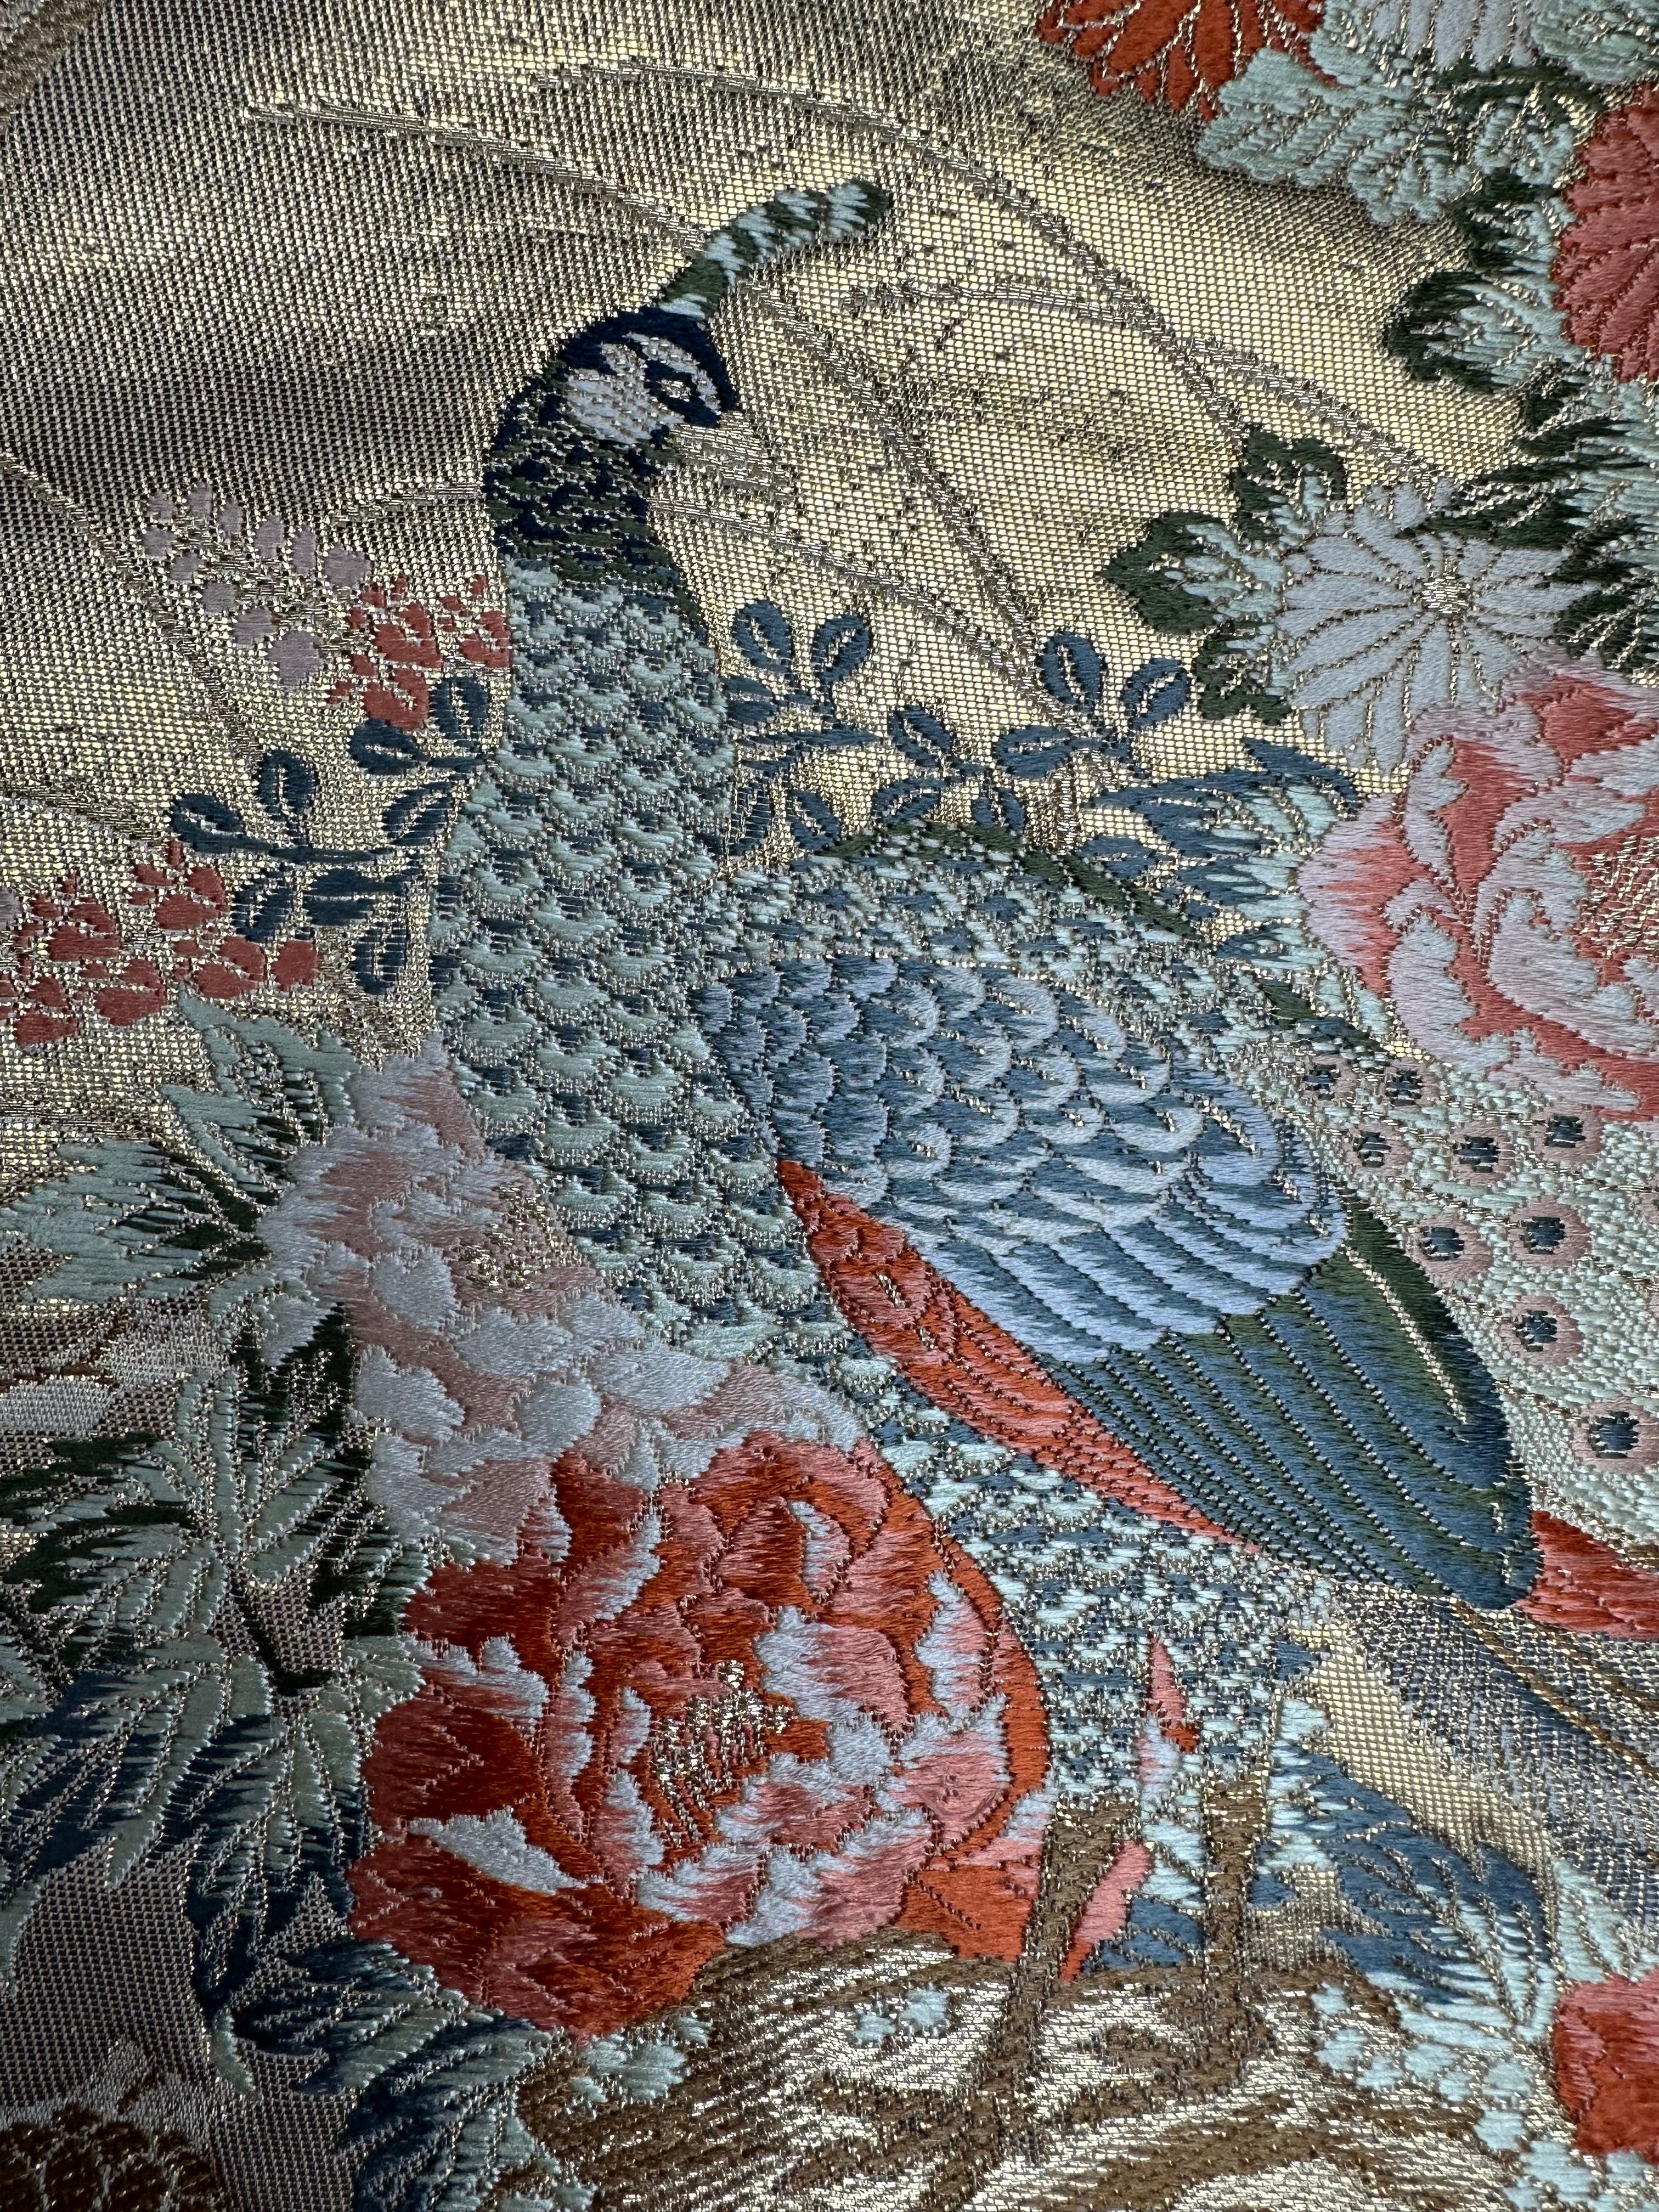 Hand-Crafted Kimono Tapestry “The Queen of Peacocks” , Japanese Art, Japanese Hanging Scroll For Sale